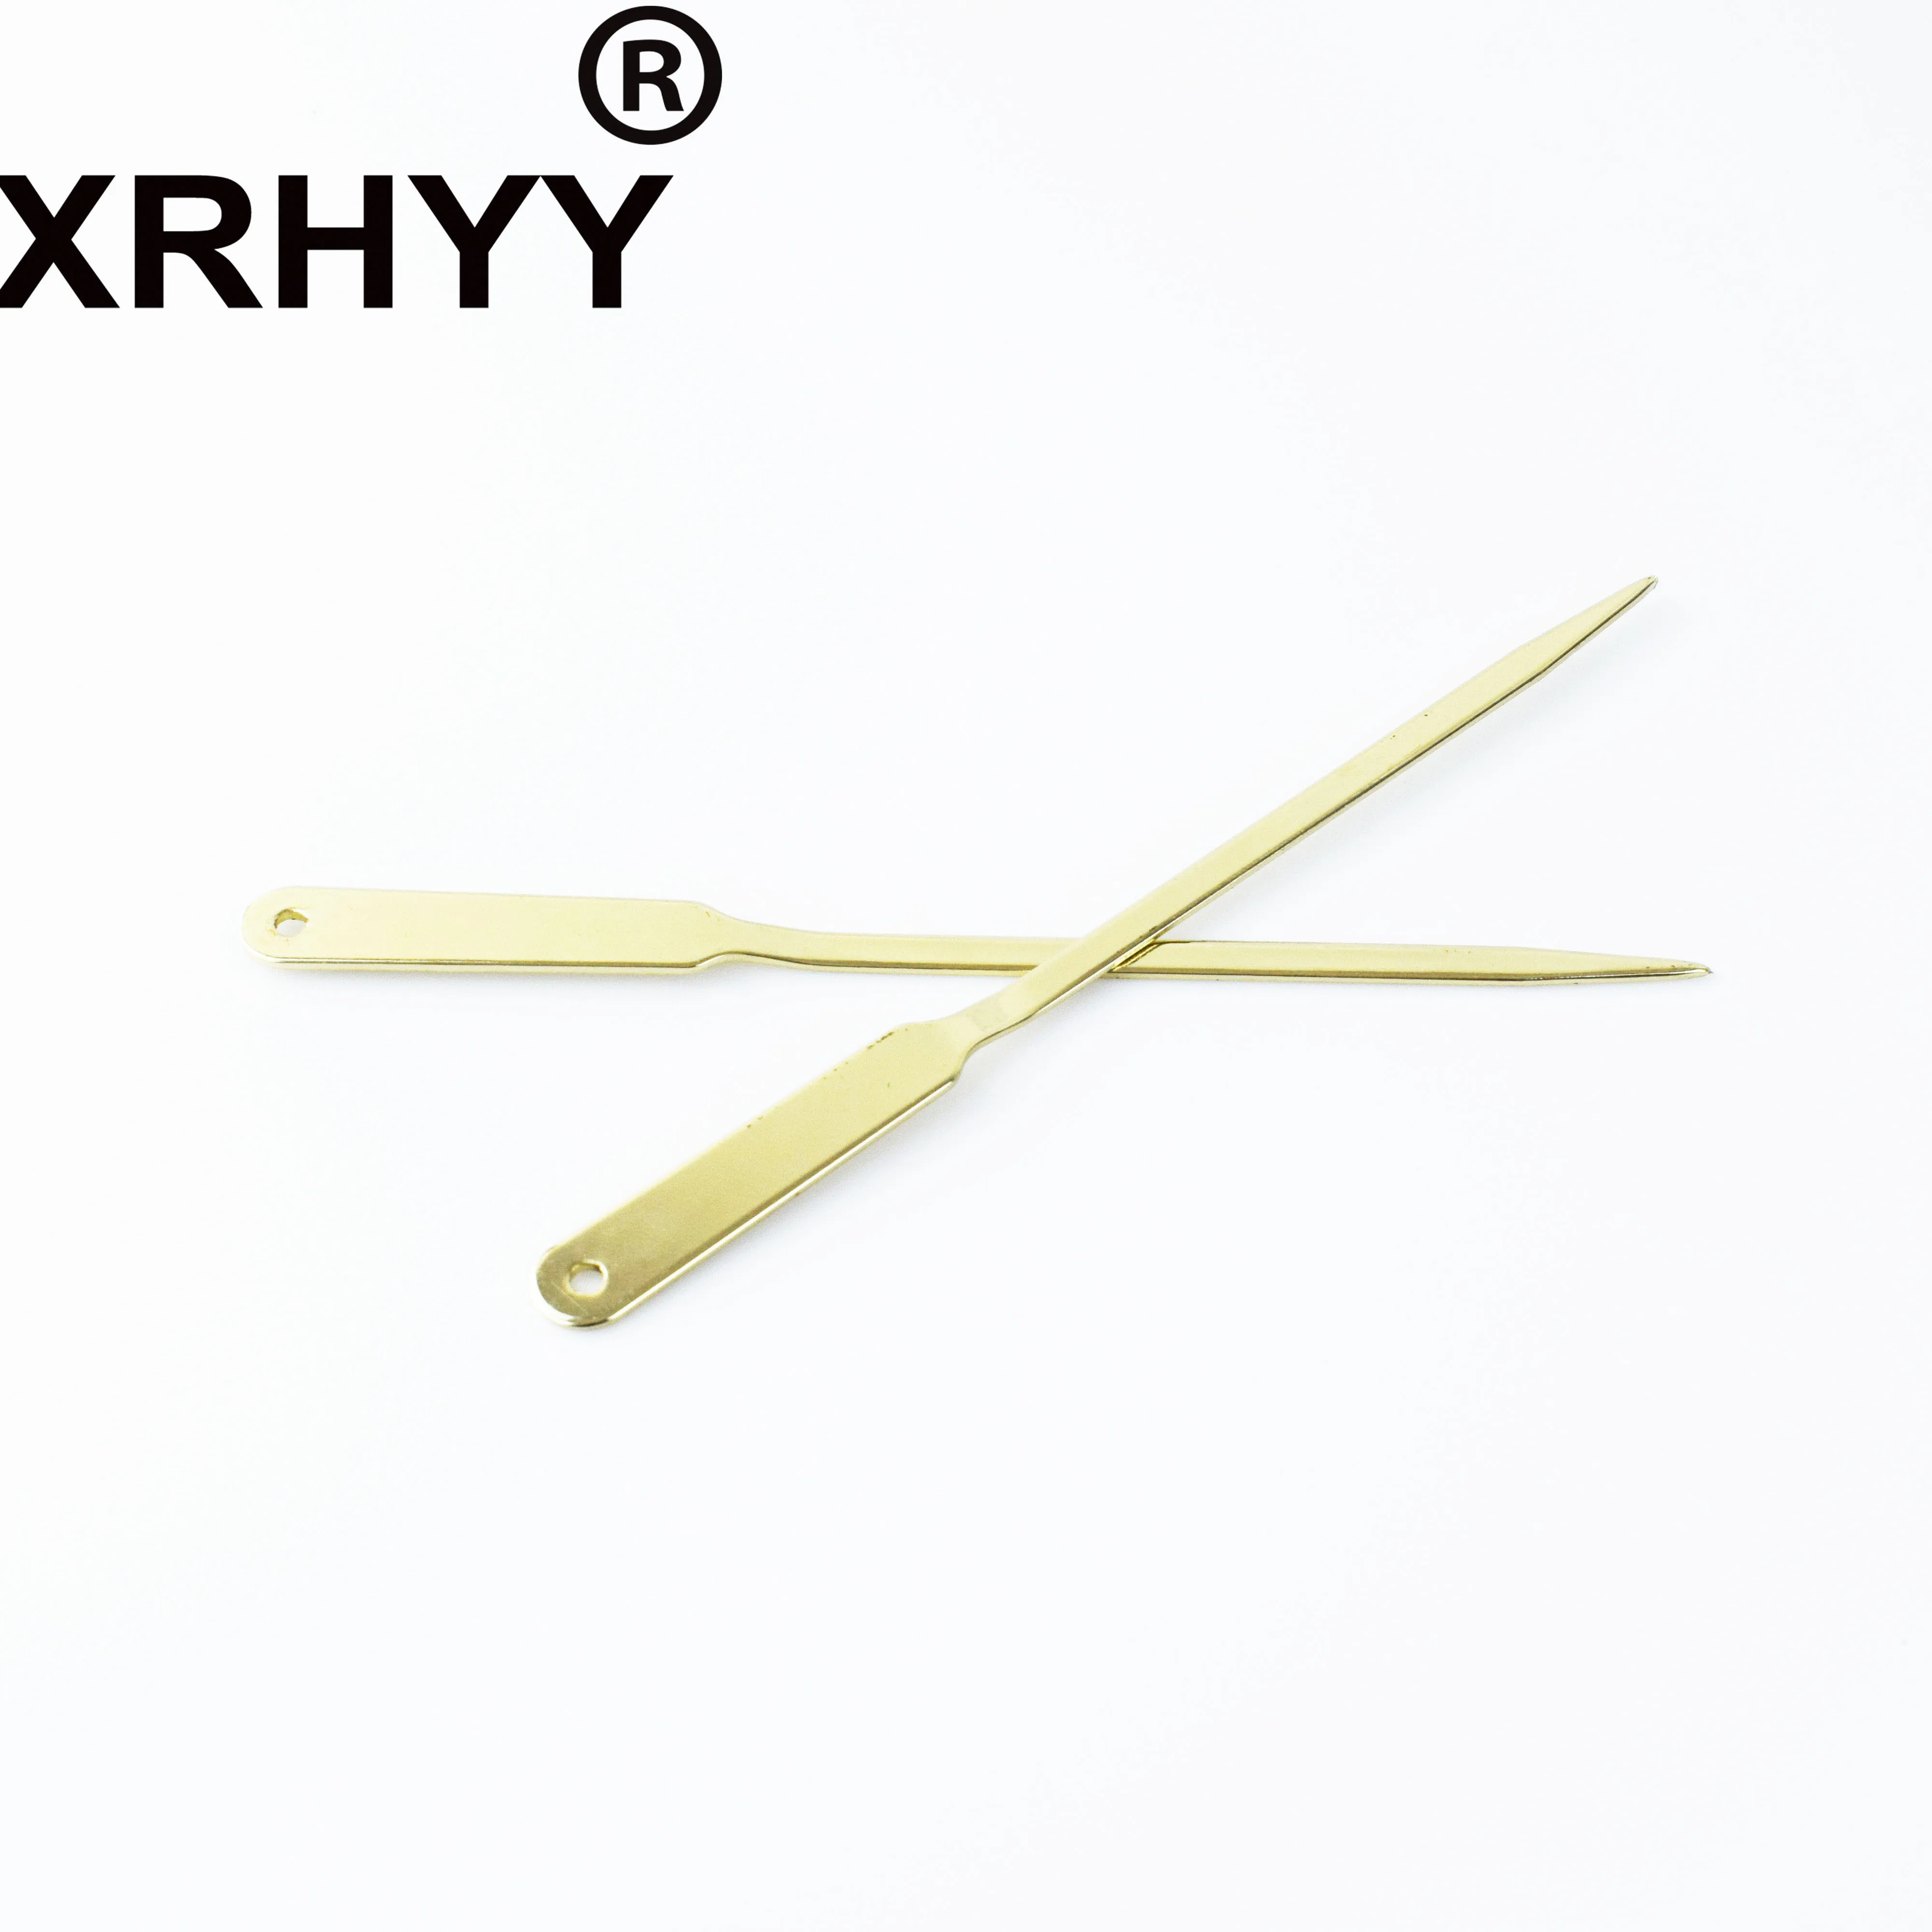 XRHYY 2 Pack Stainless Steel Hand Letter Opener Envelope Opener Knife Metal Letter Opening Knife 9 Inches ( Gold Color )